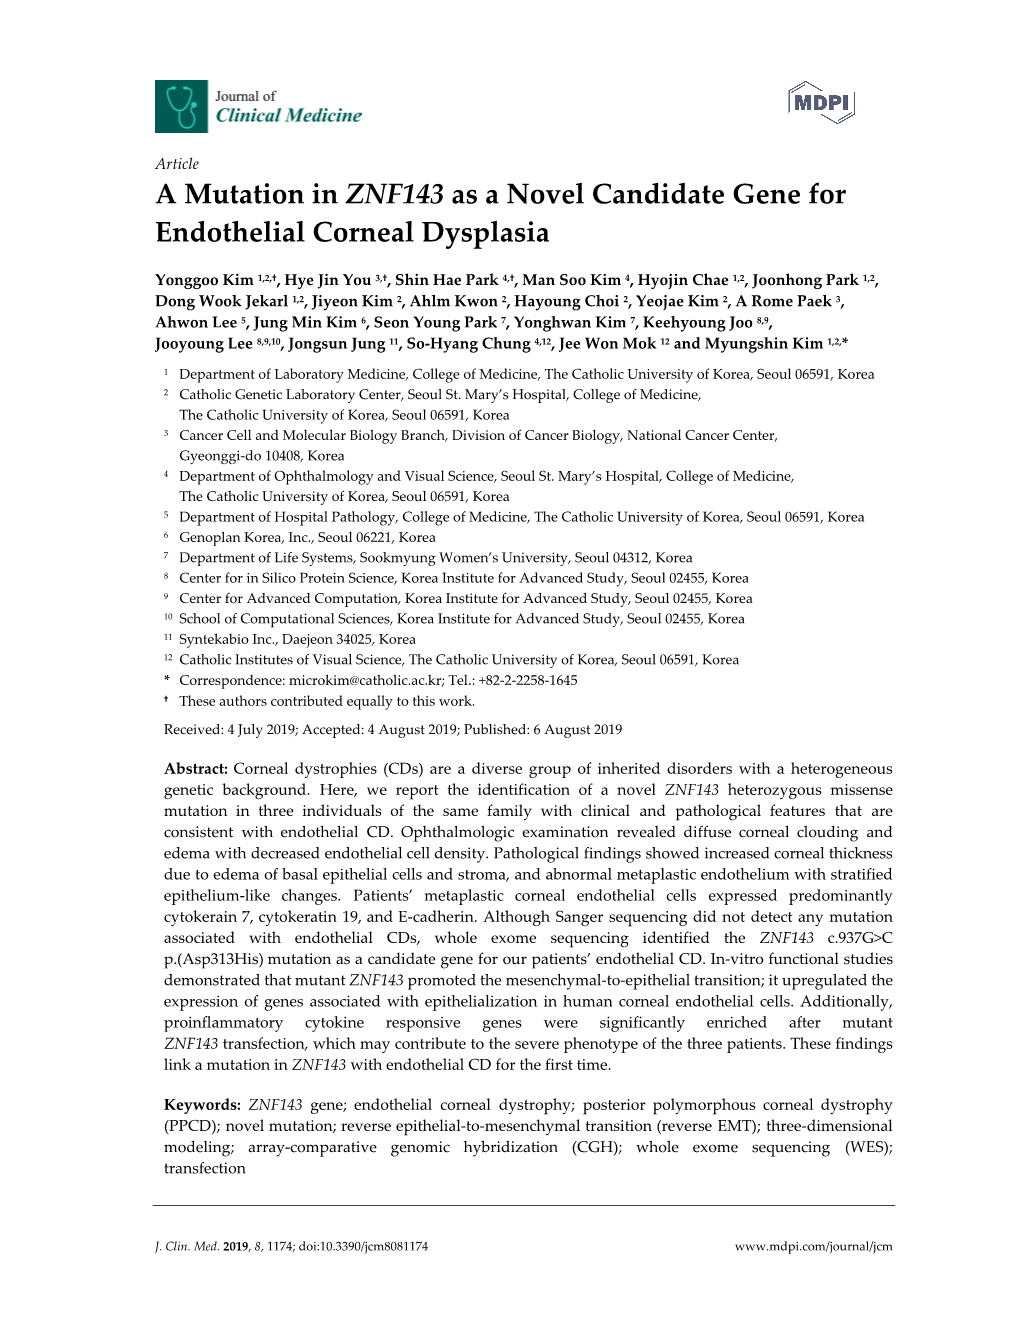 A Mutation in ZNF143 As a Novel Candidate Gene for Endothelial Corneal Dysplasia